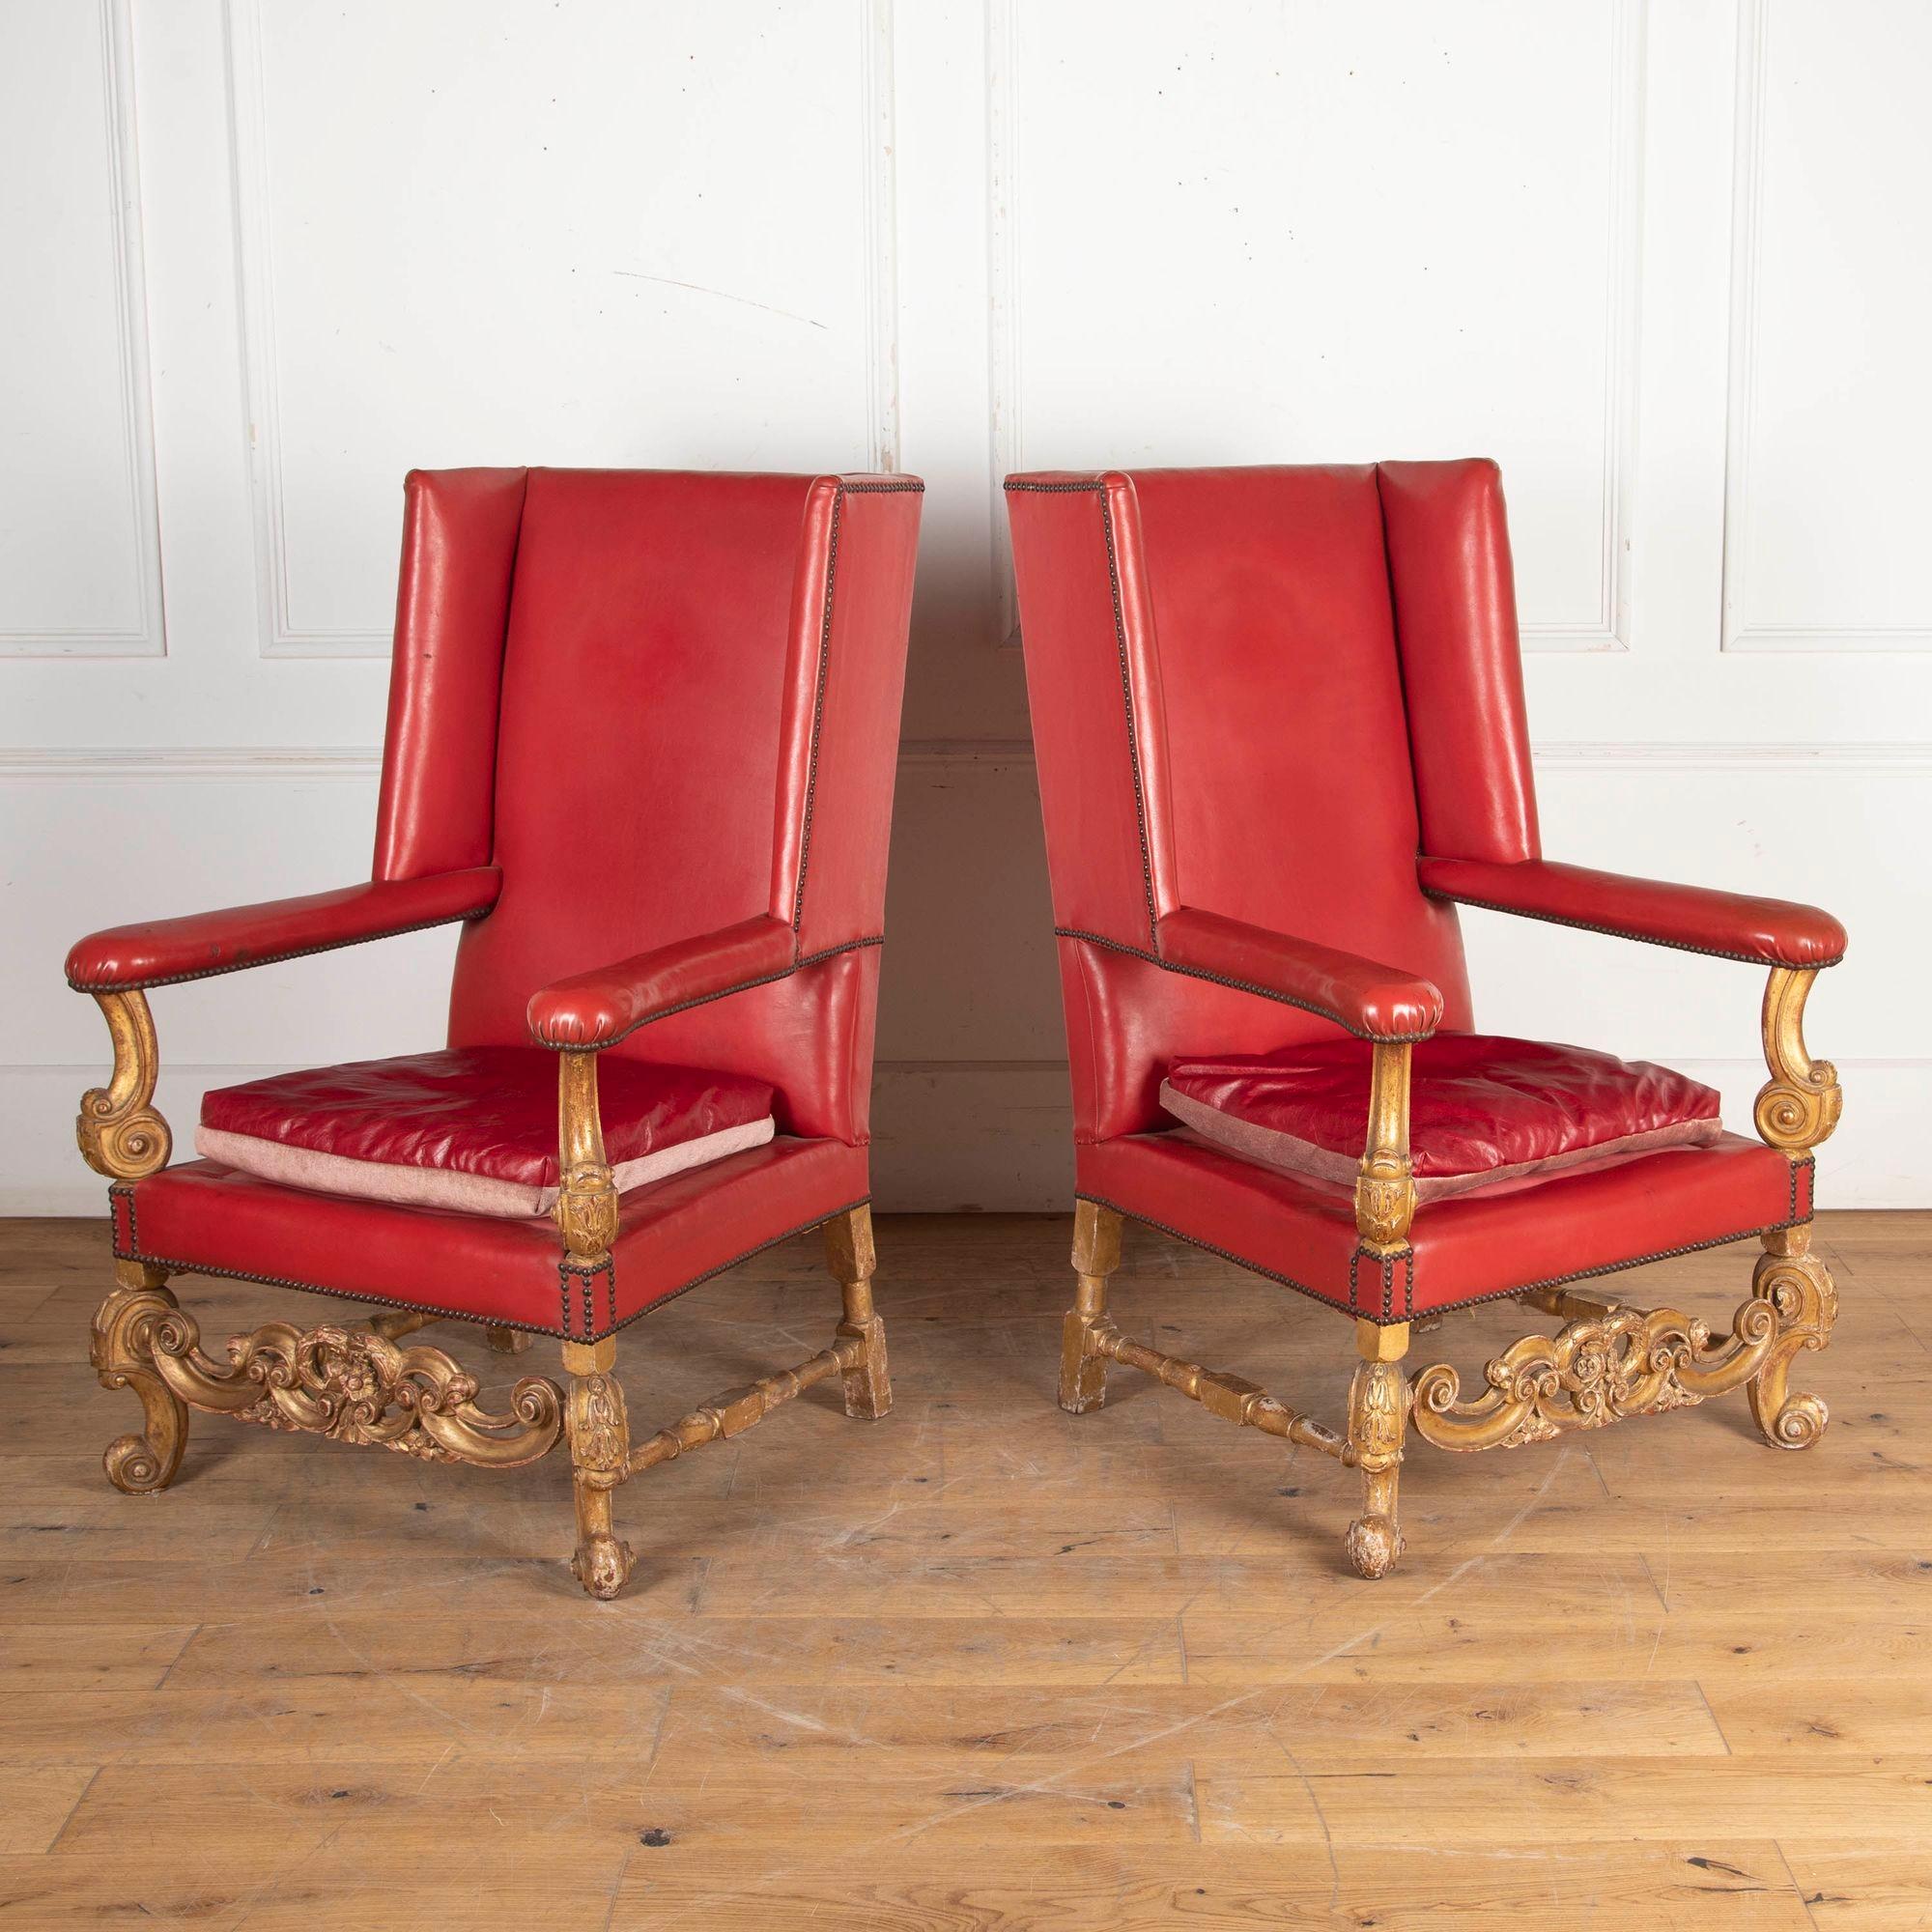 Pair of 19th century red leather wingback armchairs in the William and Mary style.
With a fabulous gilded frame and intricate carving, this pair of striking chairs make for perfect fireside armchairs.